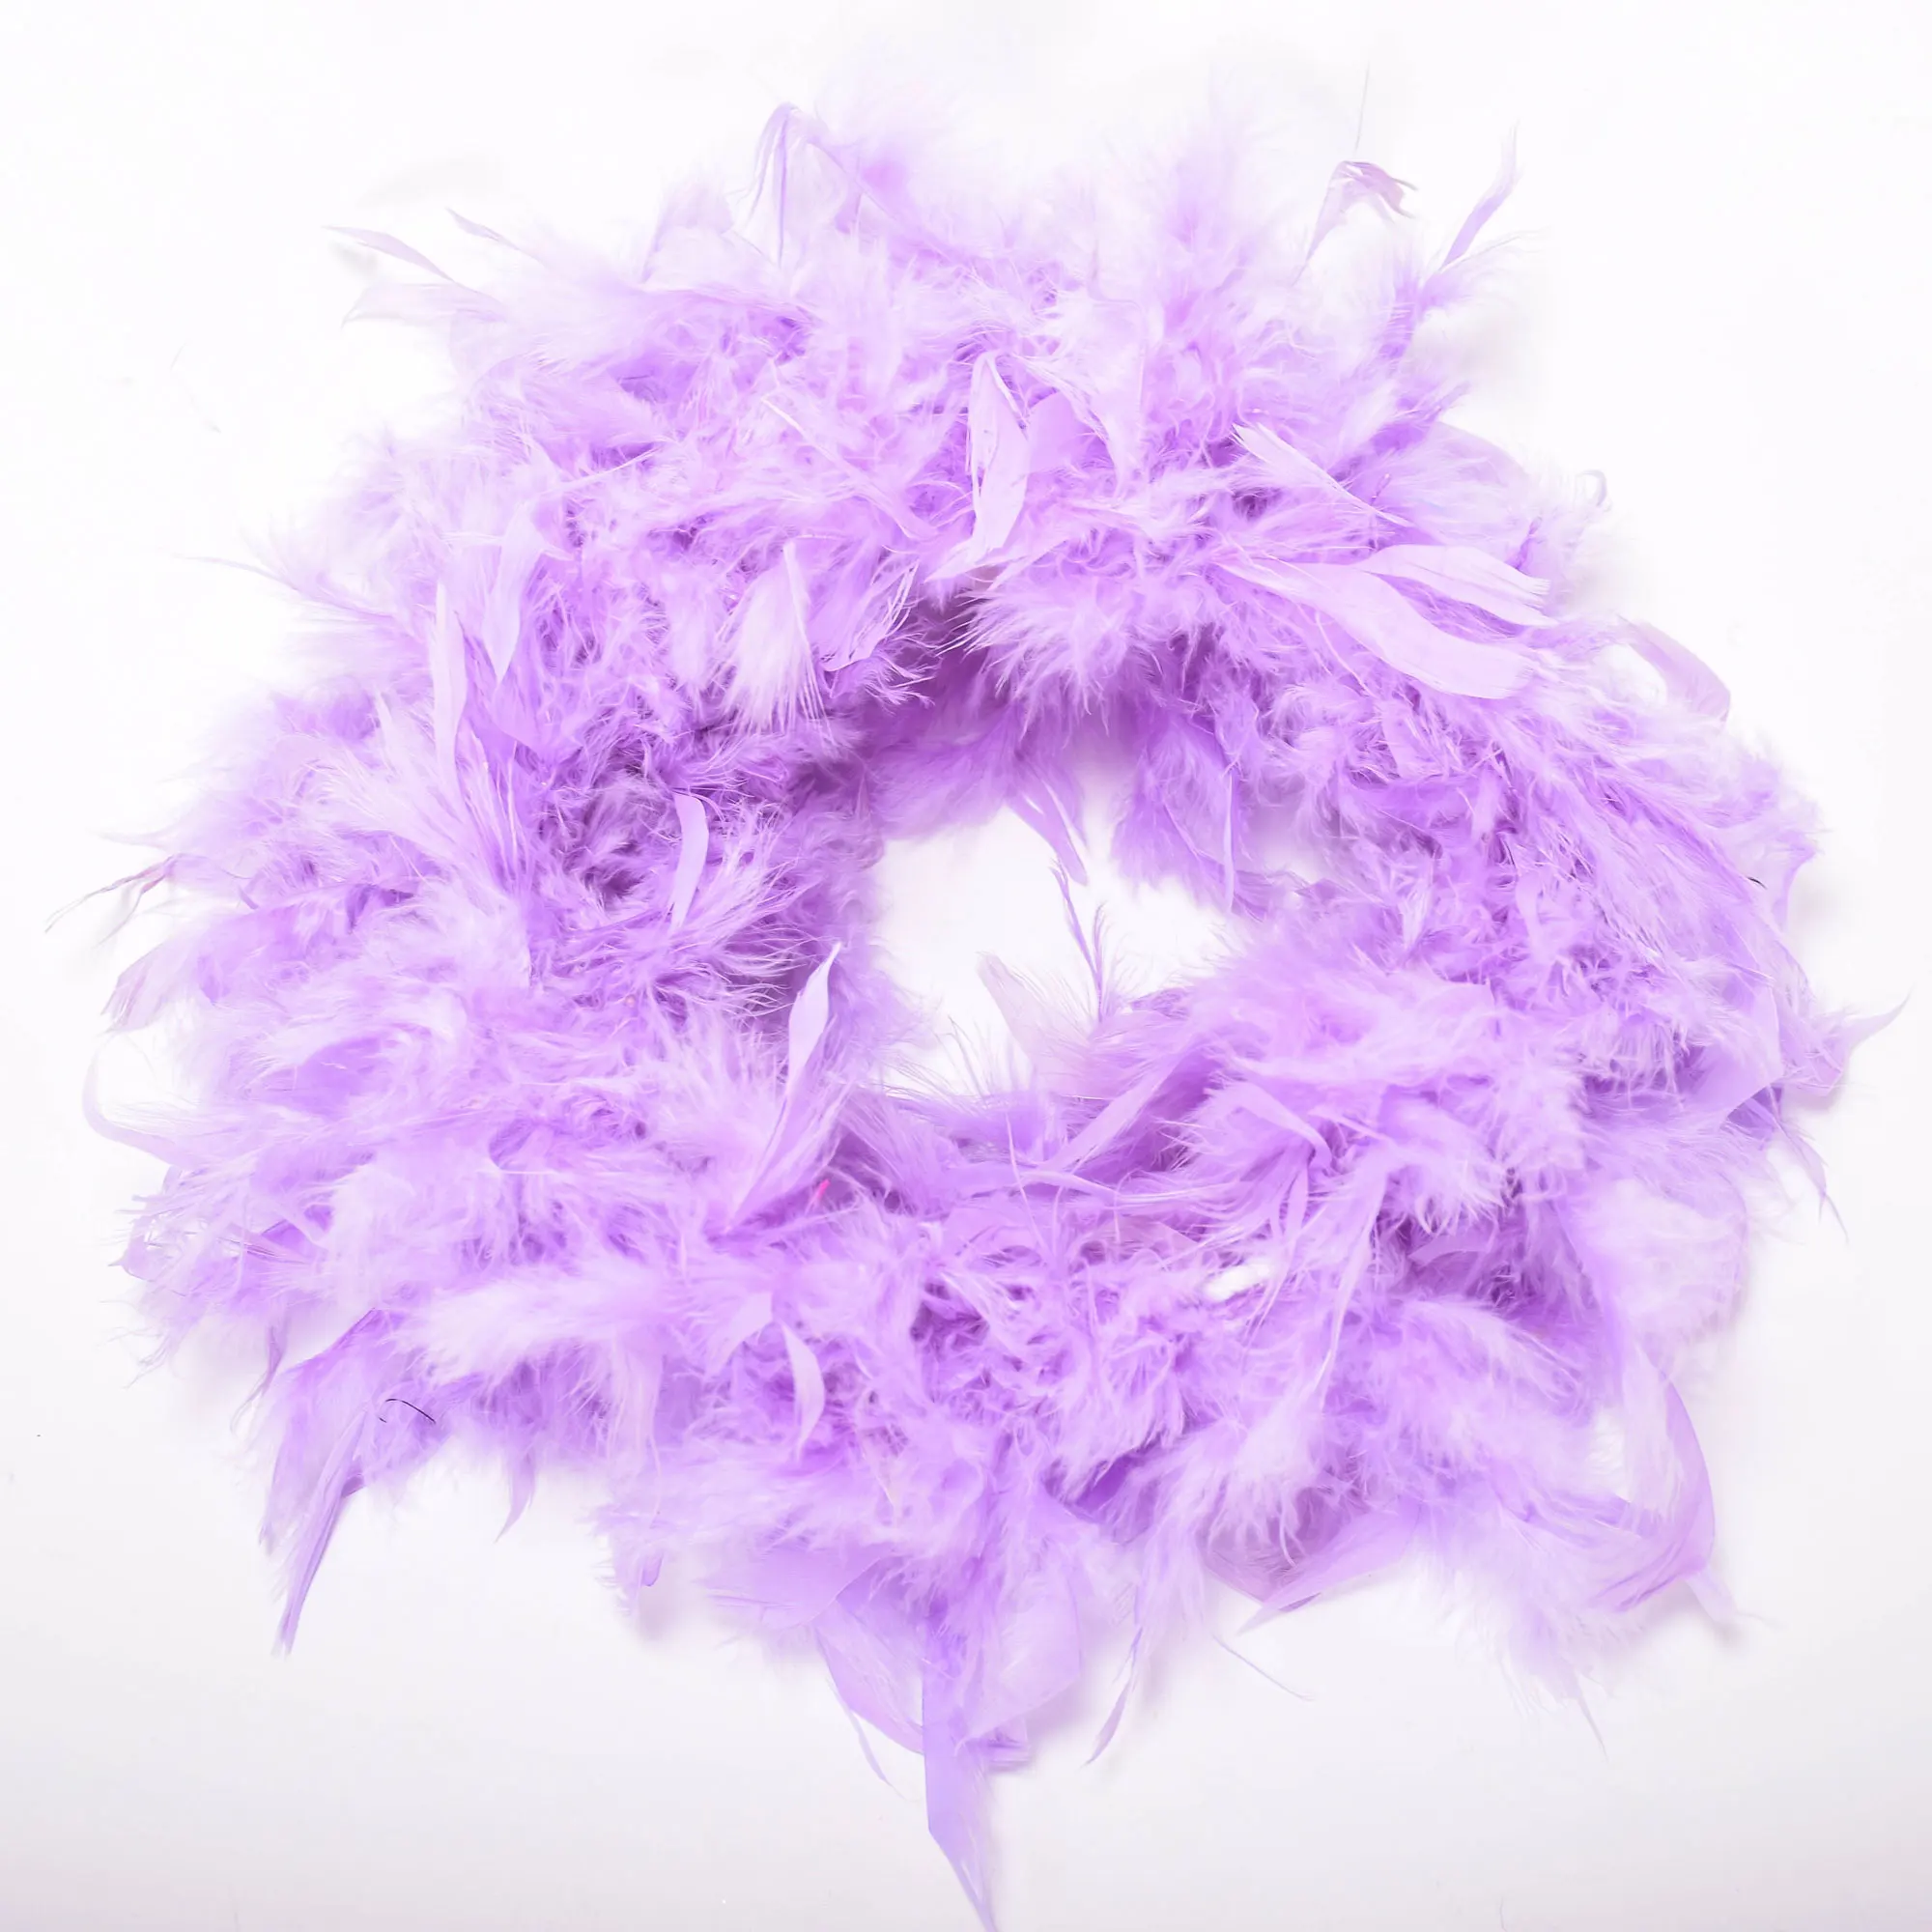 2M Multi Color Fluffy Handcraft Ostrich Feather Plume Boas Scarf Clothes for Wedding Valentine Day Decoration Performance Dance - Цвет: Светло-фиолетовый